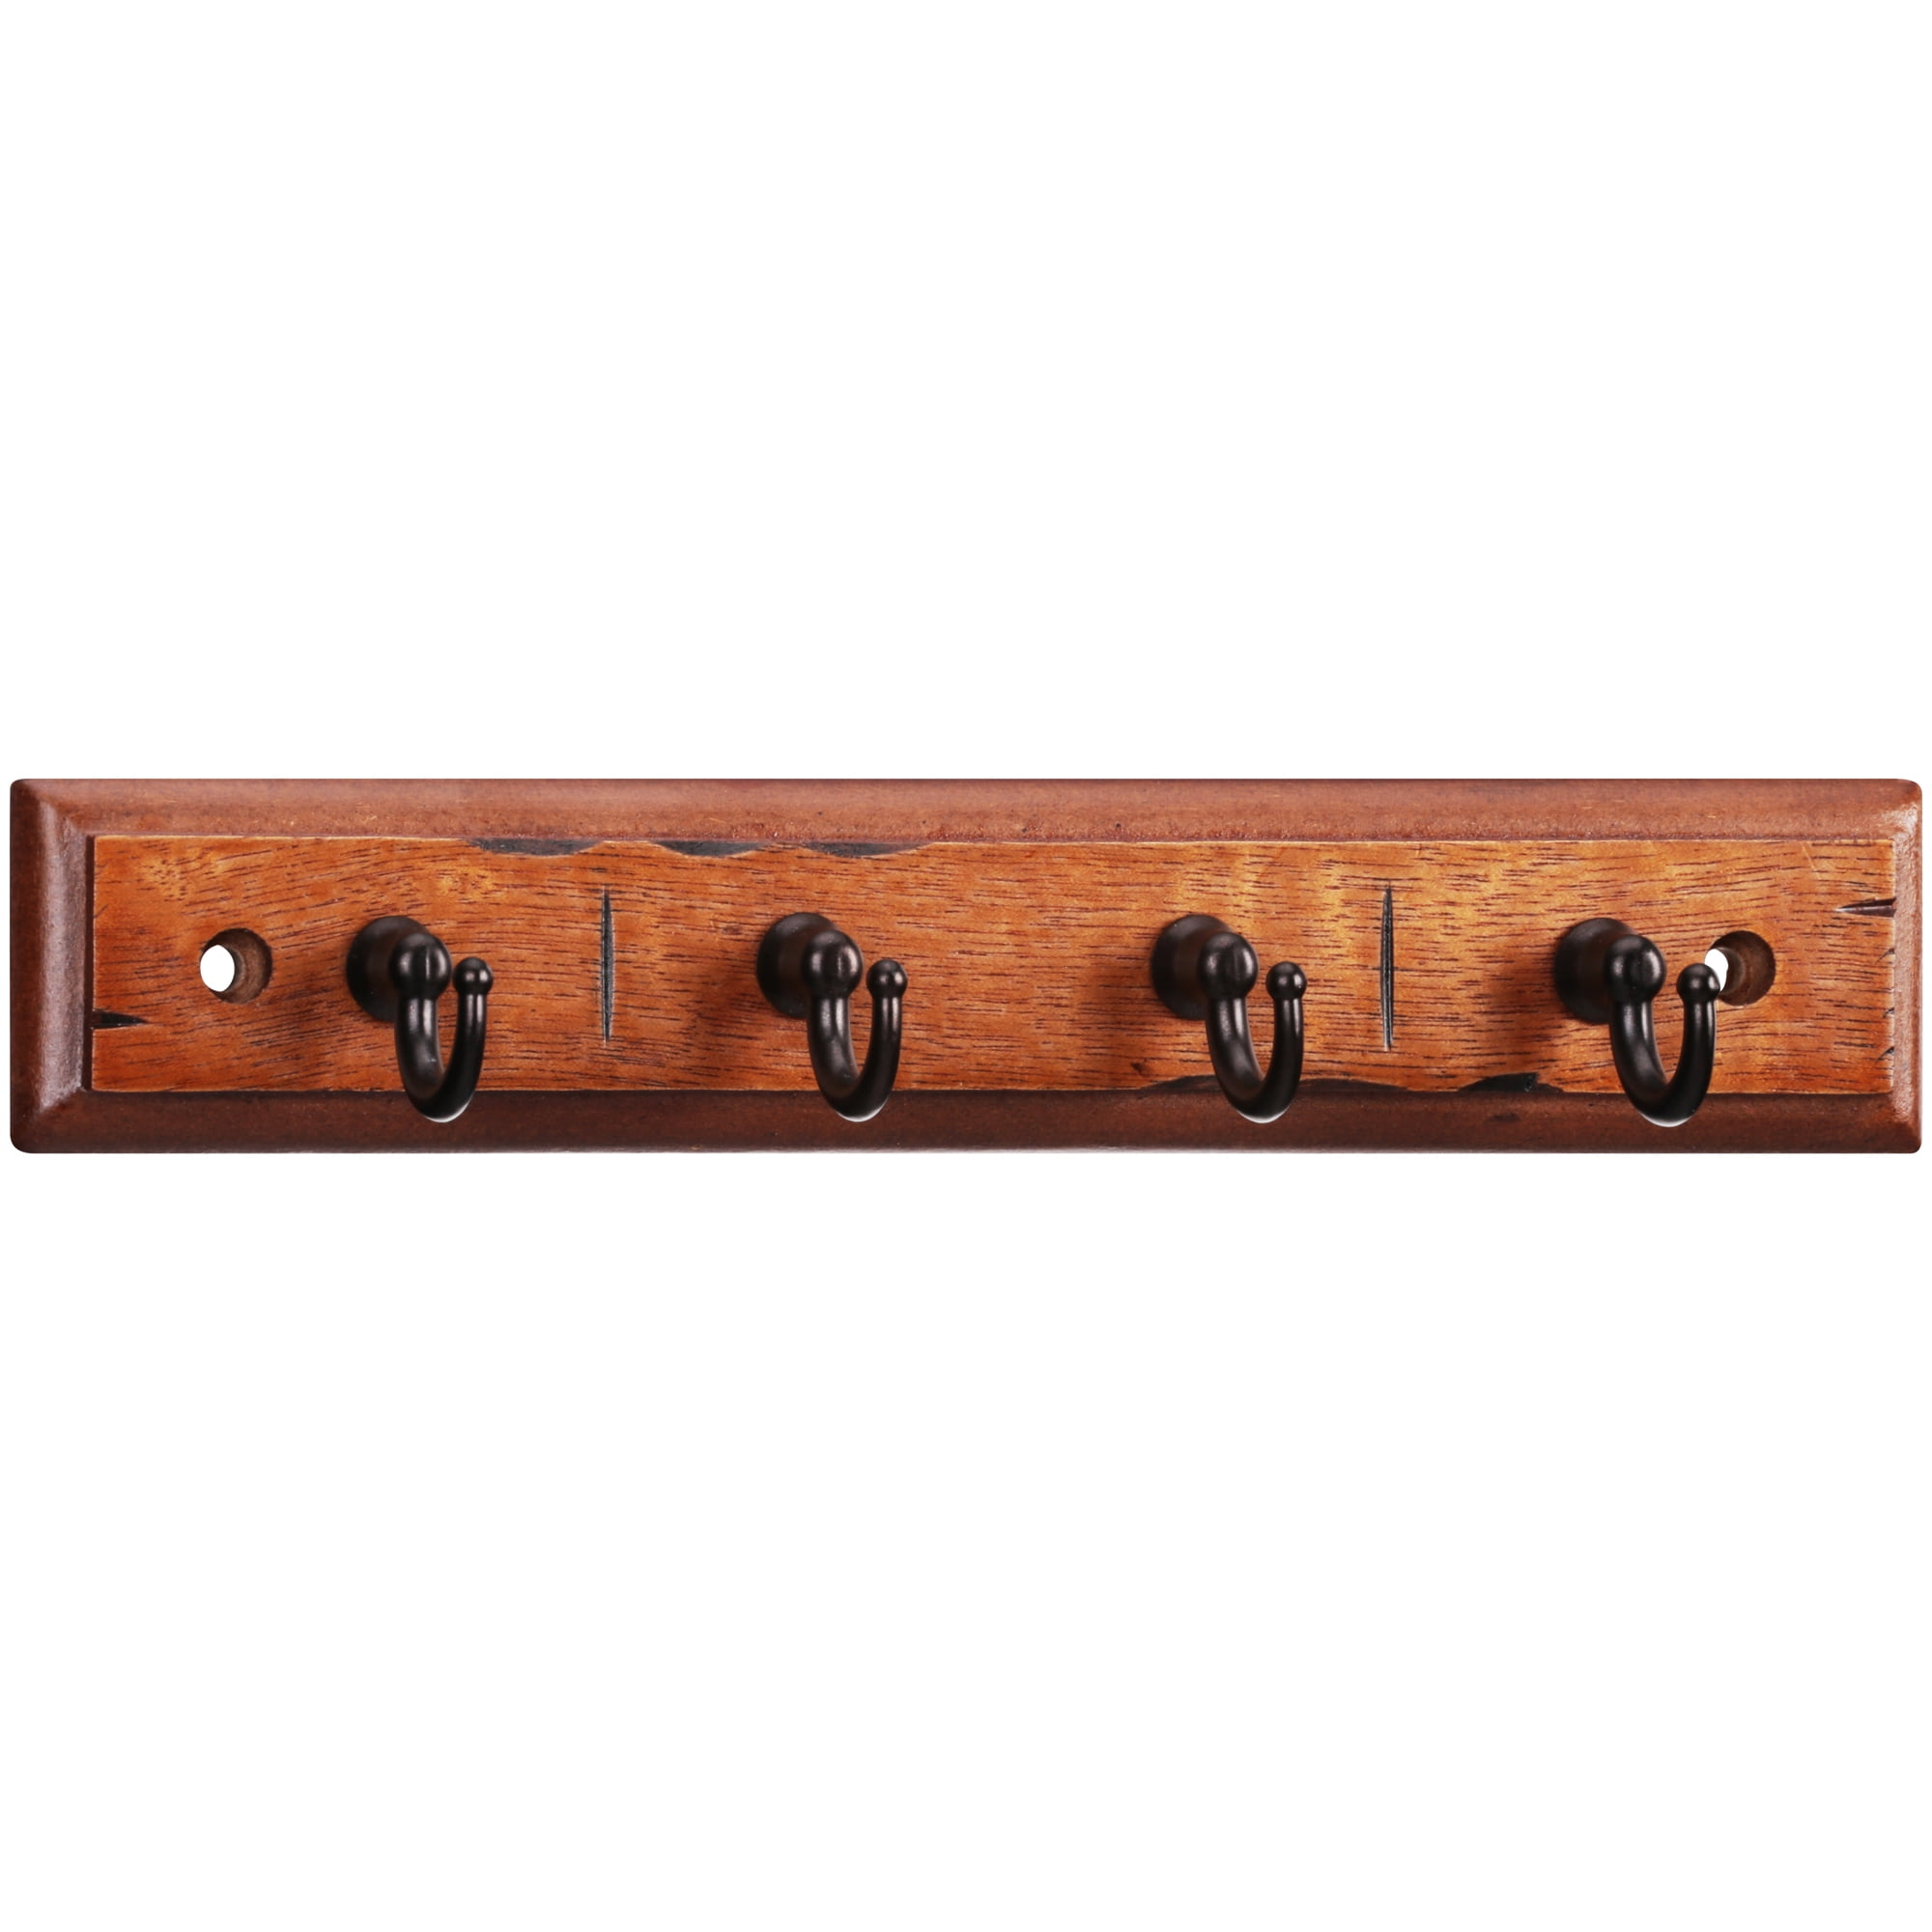 Key rack/ holder solid  oak fitted with 4 antique brass hooks top quality item 